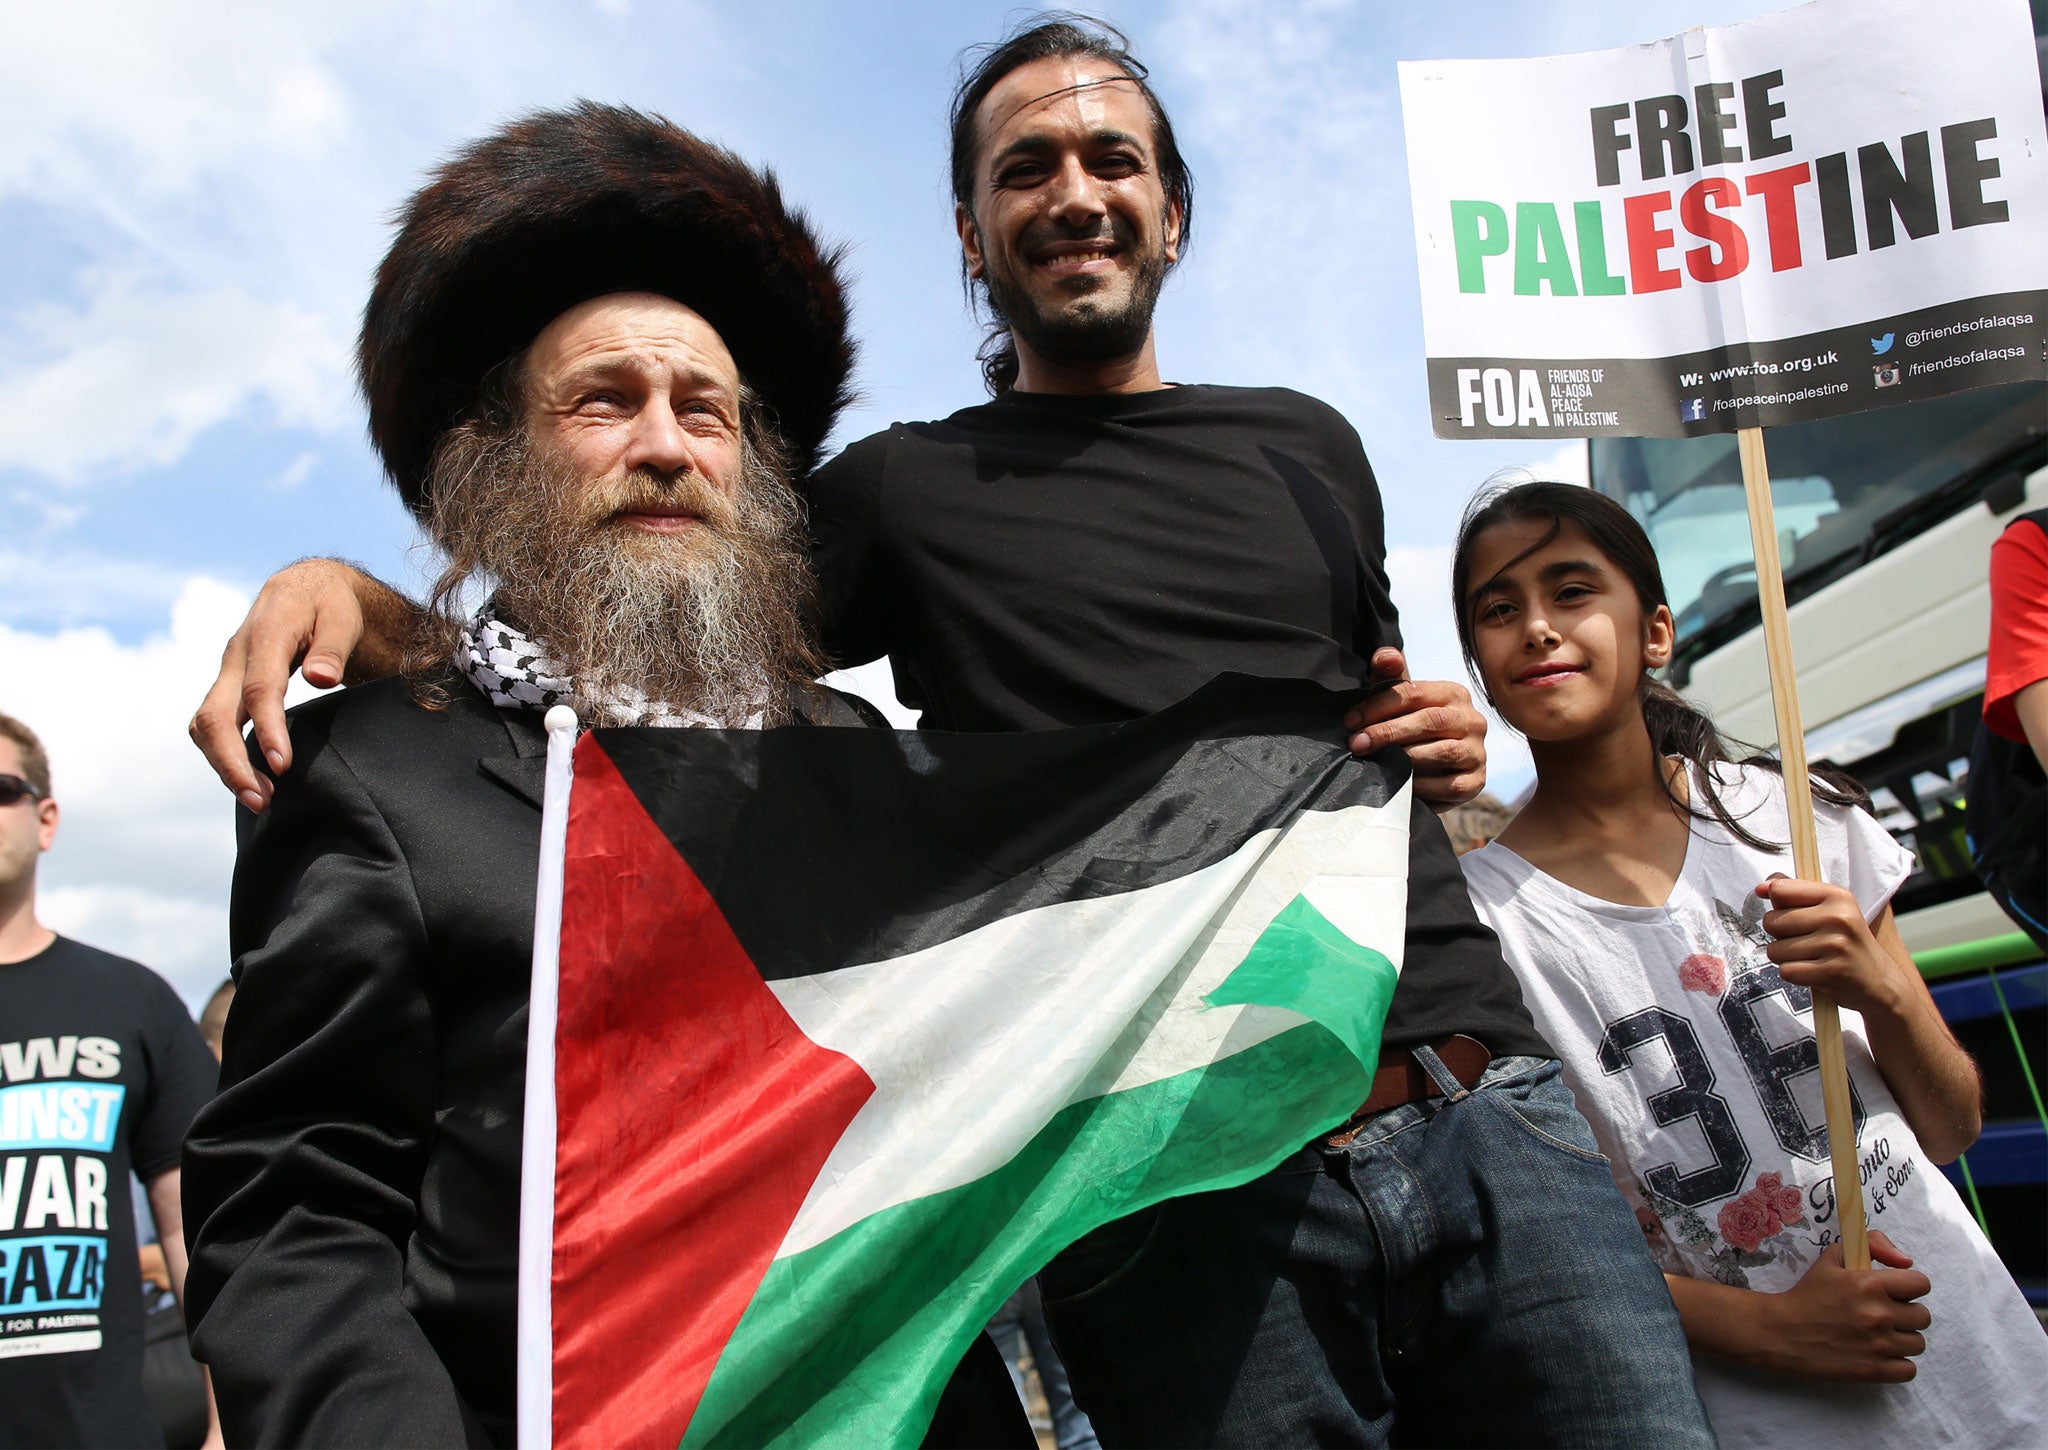 A religious Jewish man stands with pro-Palestinian supporters during the rally in Hyde Park on 9 August 9